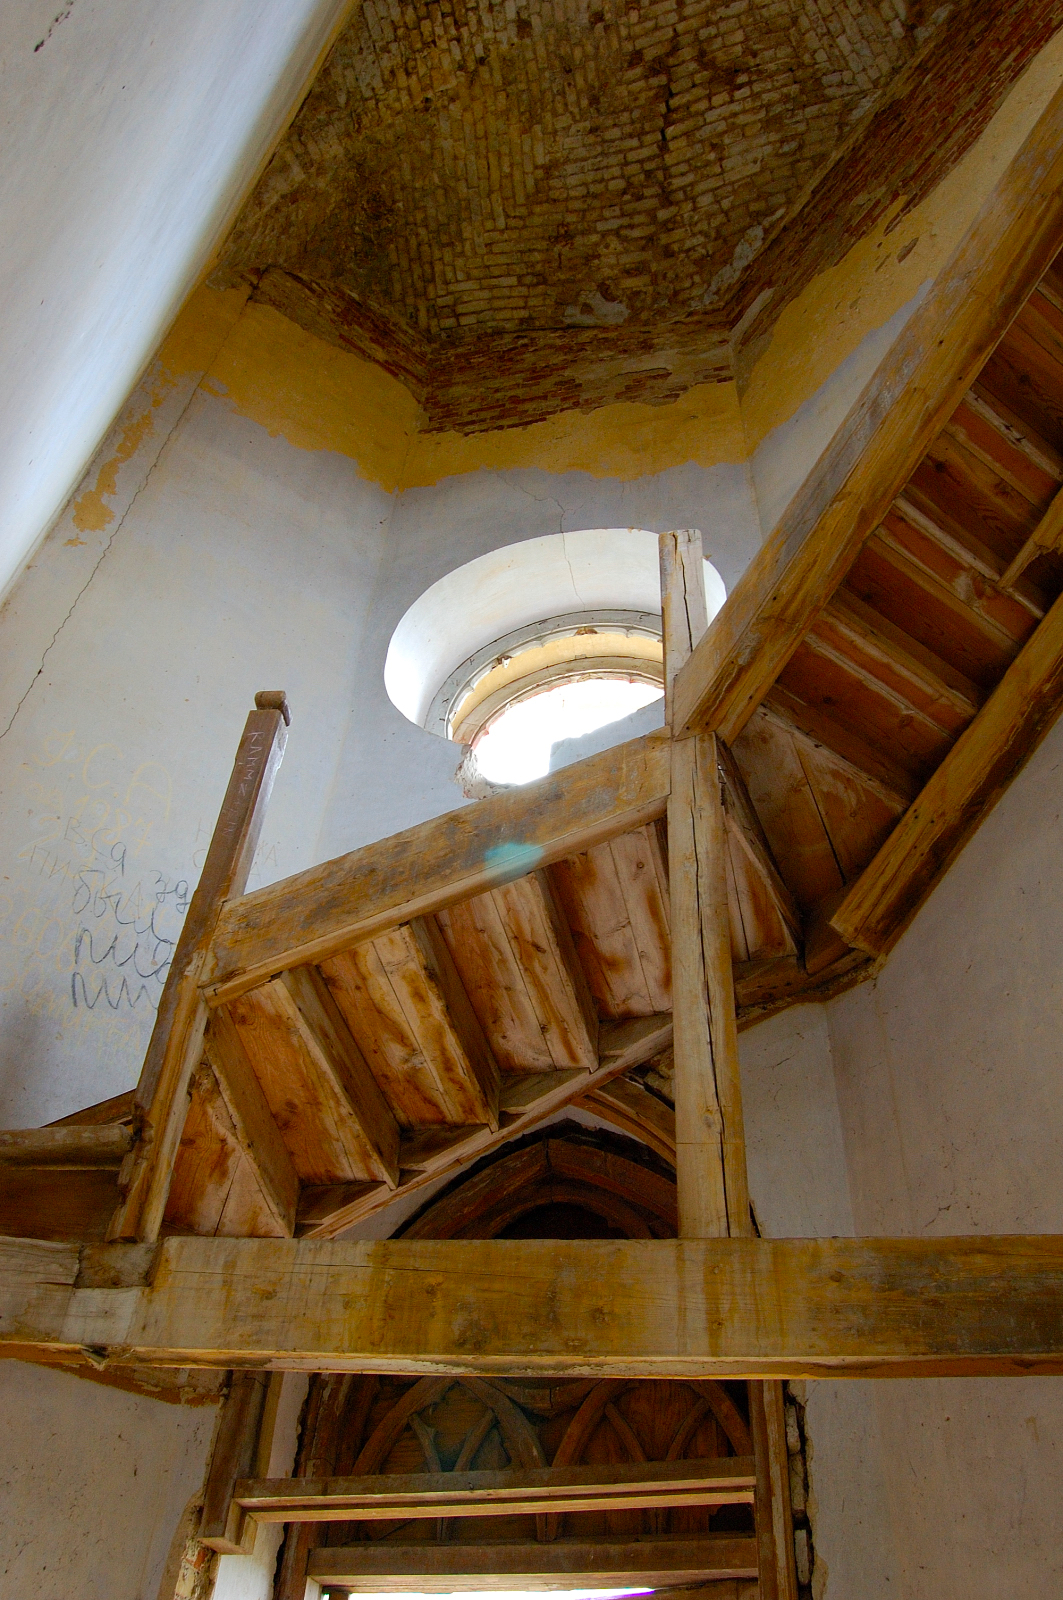 Stairway leading to the steeple of the church in Kamenka. Source: Steve Schreiber (2006).